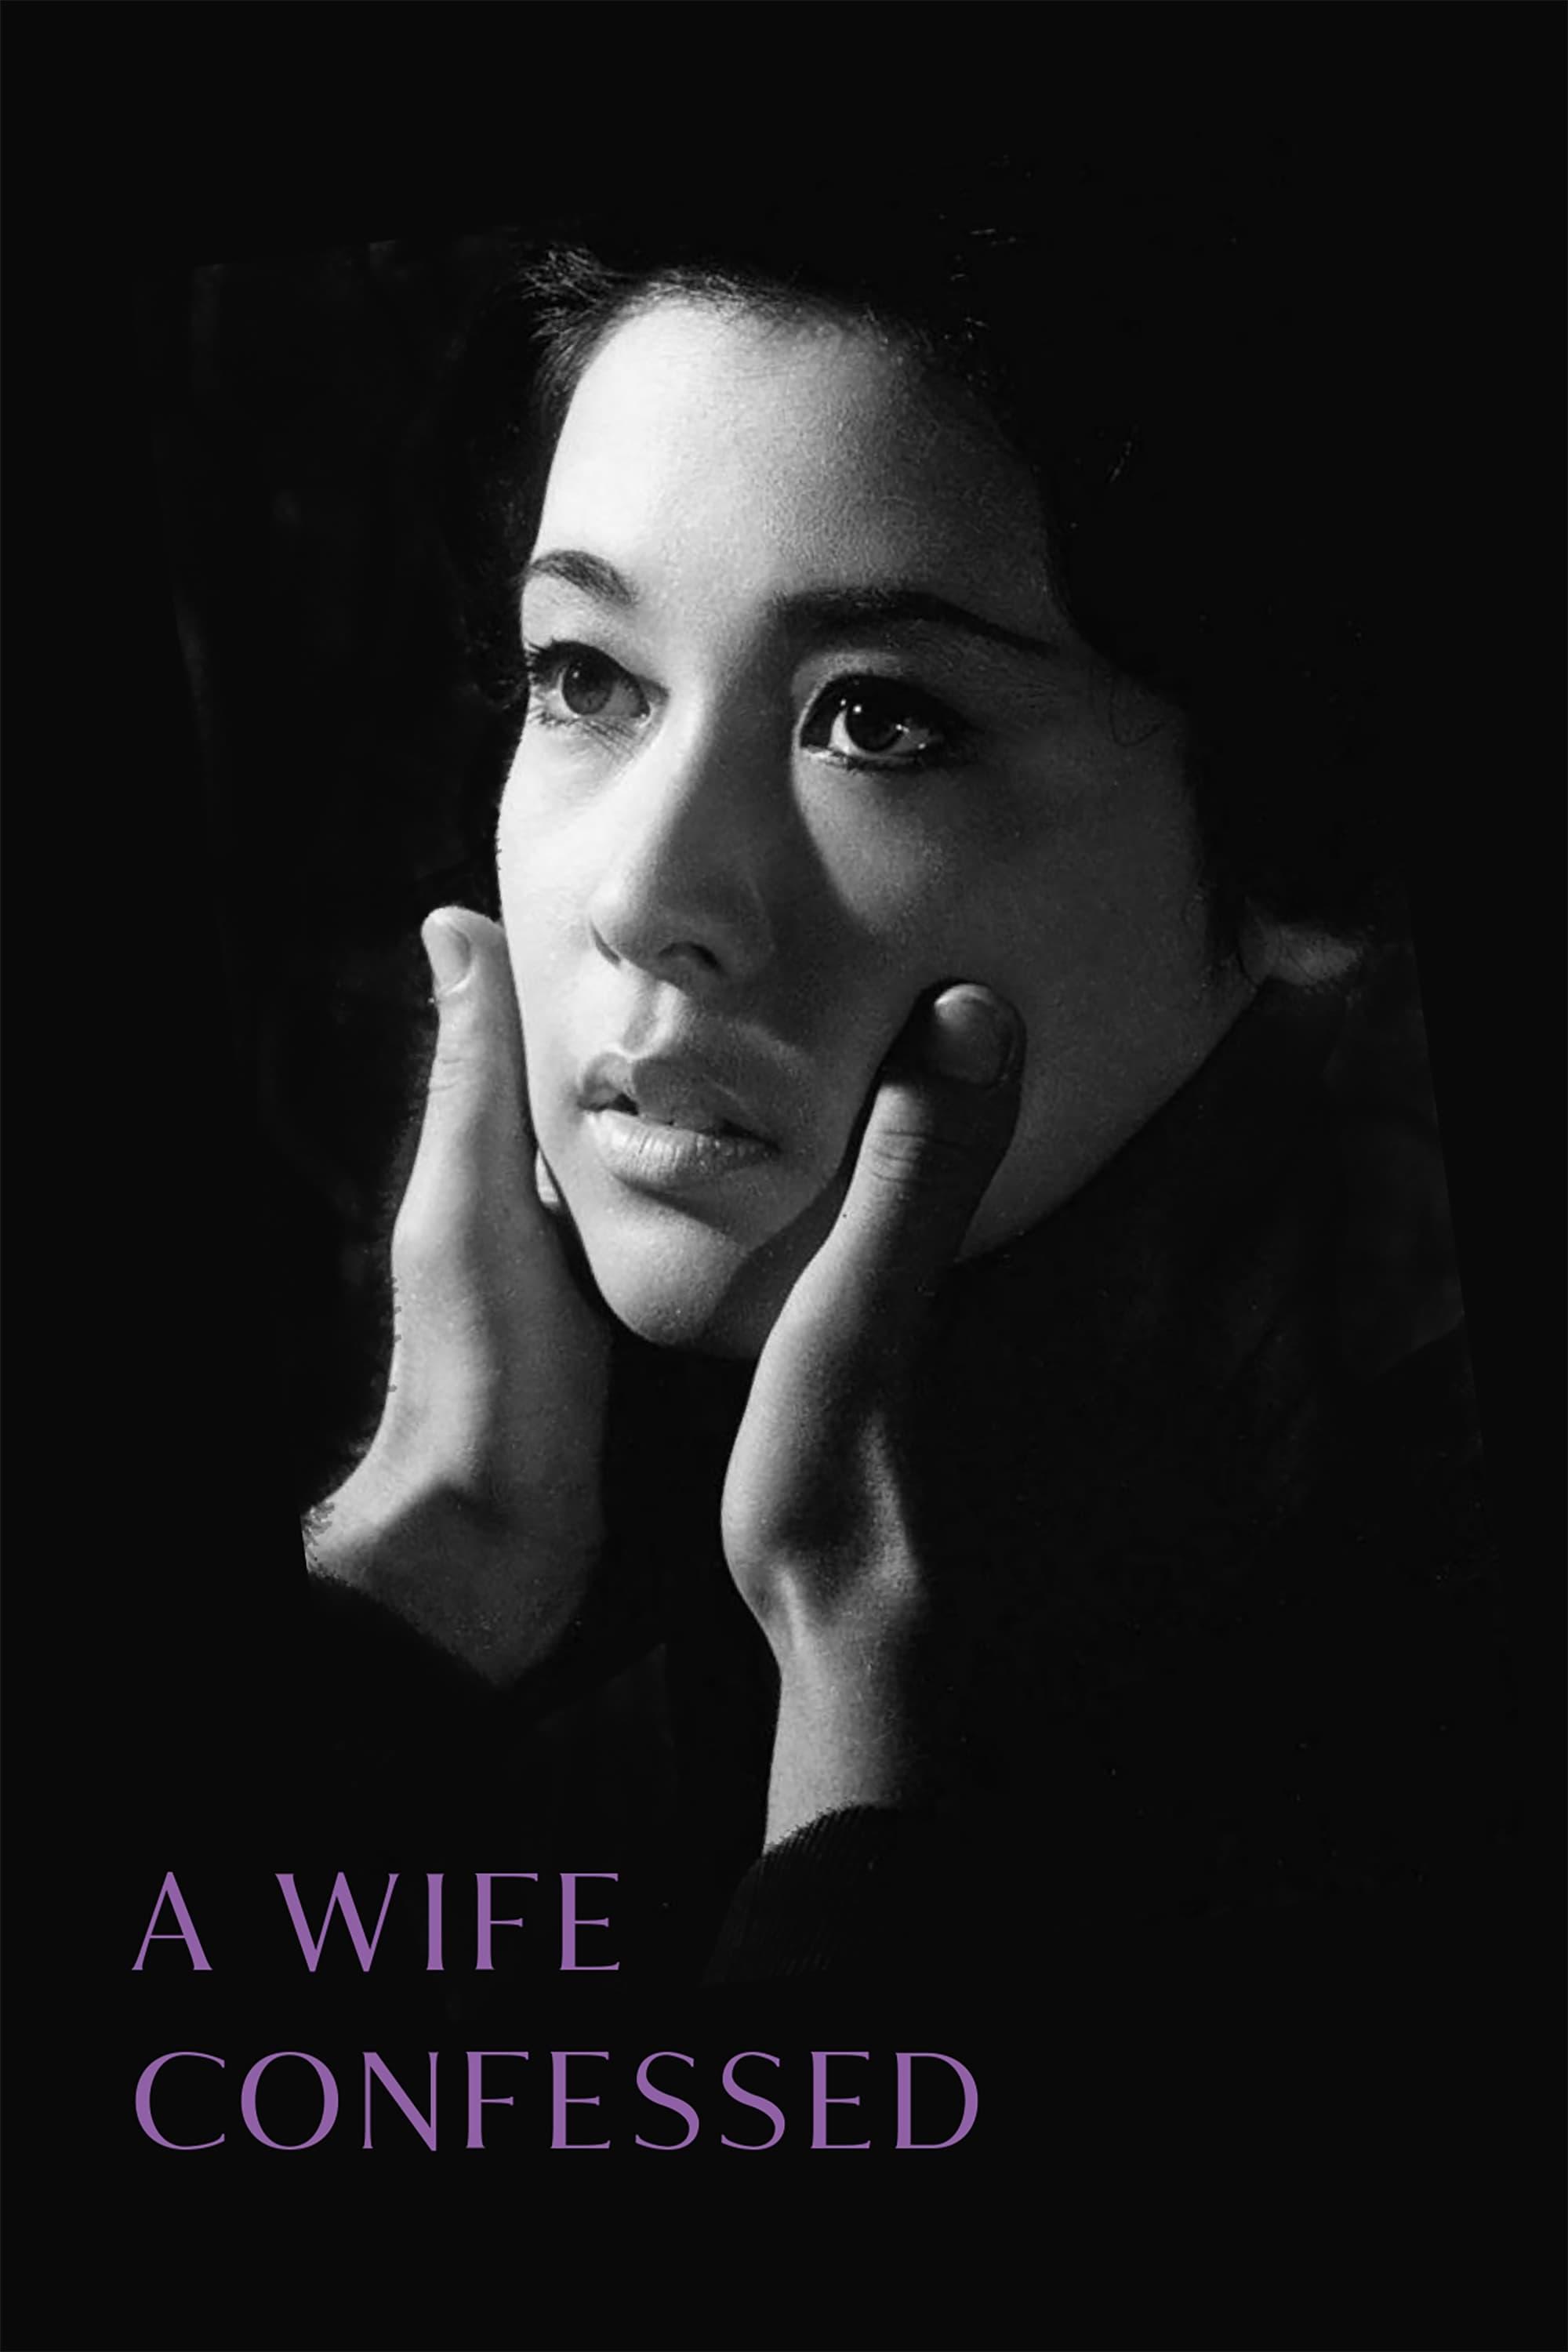 A Wife Confesses poster